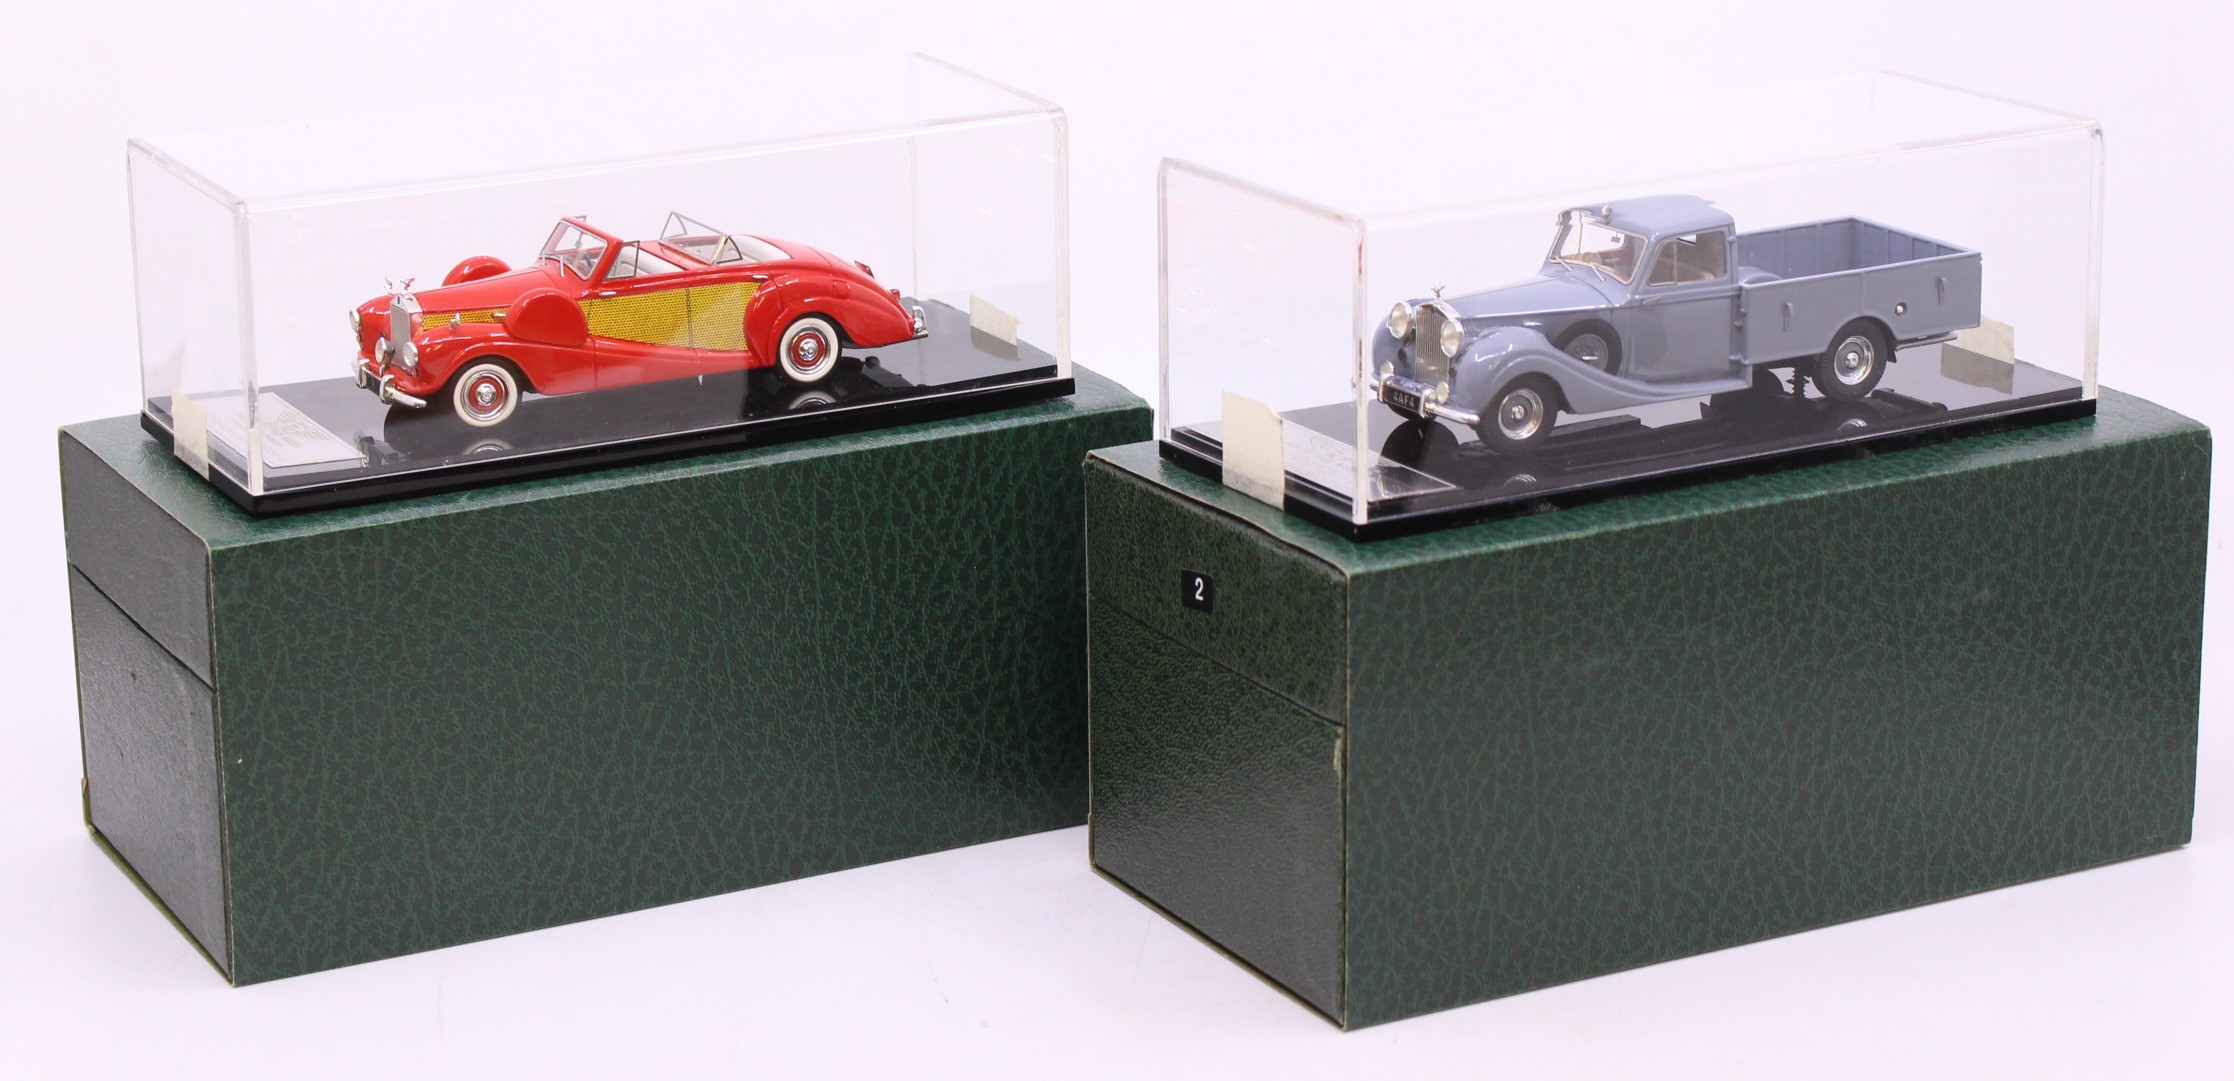 British Heritage Models: A pair of boxed 1:43 Scale British Heritage Models (BHM) vehicles: The